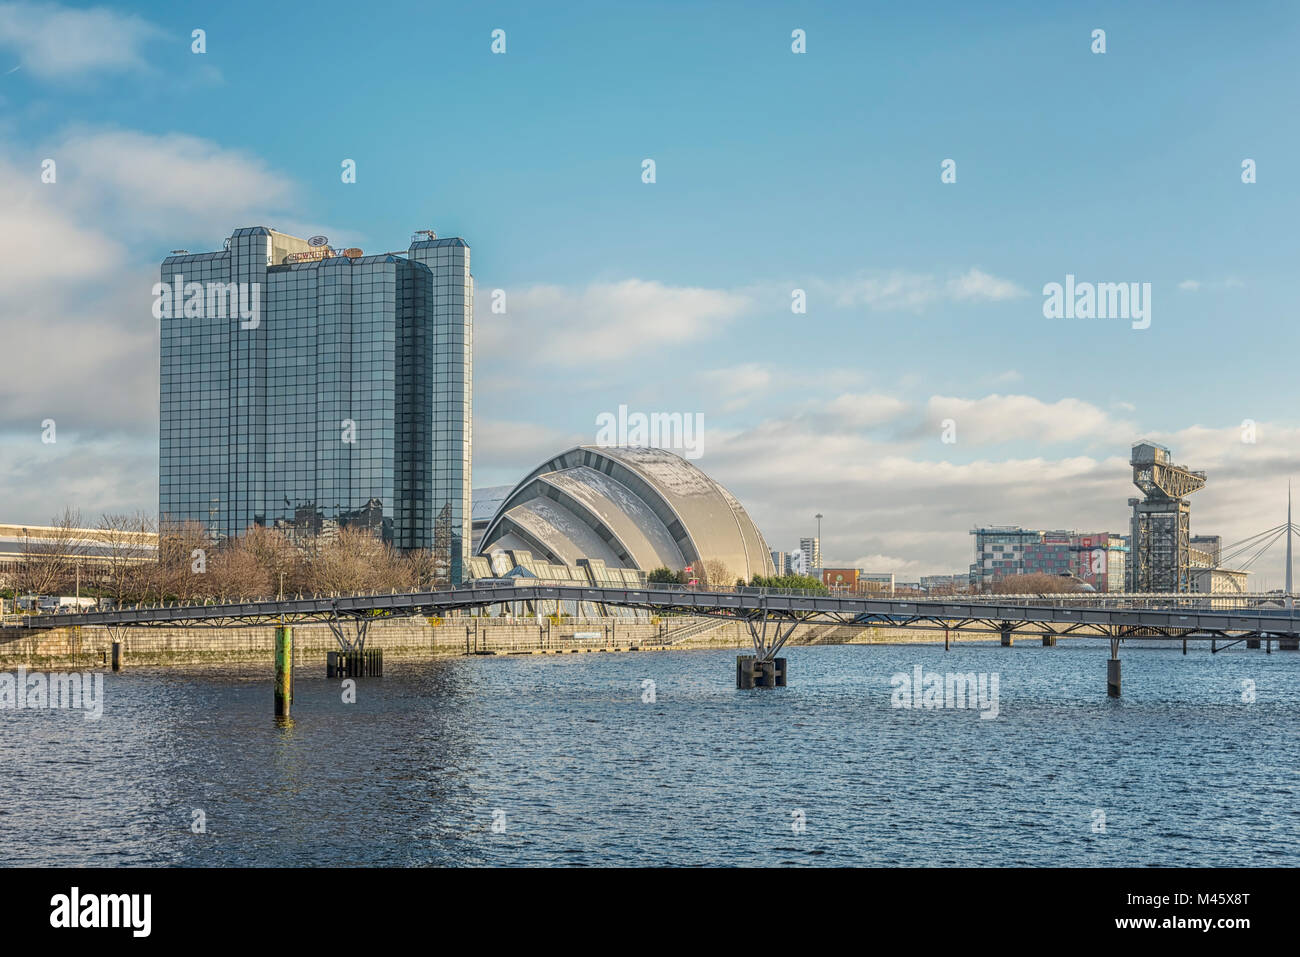 GLASGOW, SCOTLAND - JANUARY 17, 2018: A cityscape view of Glasgow from along the river clyde. Stock Photo